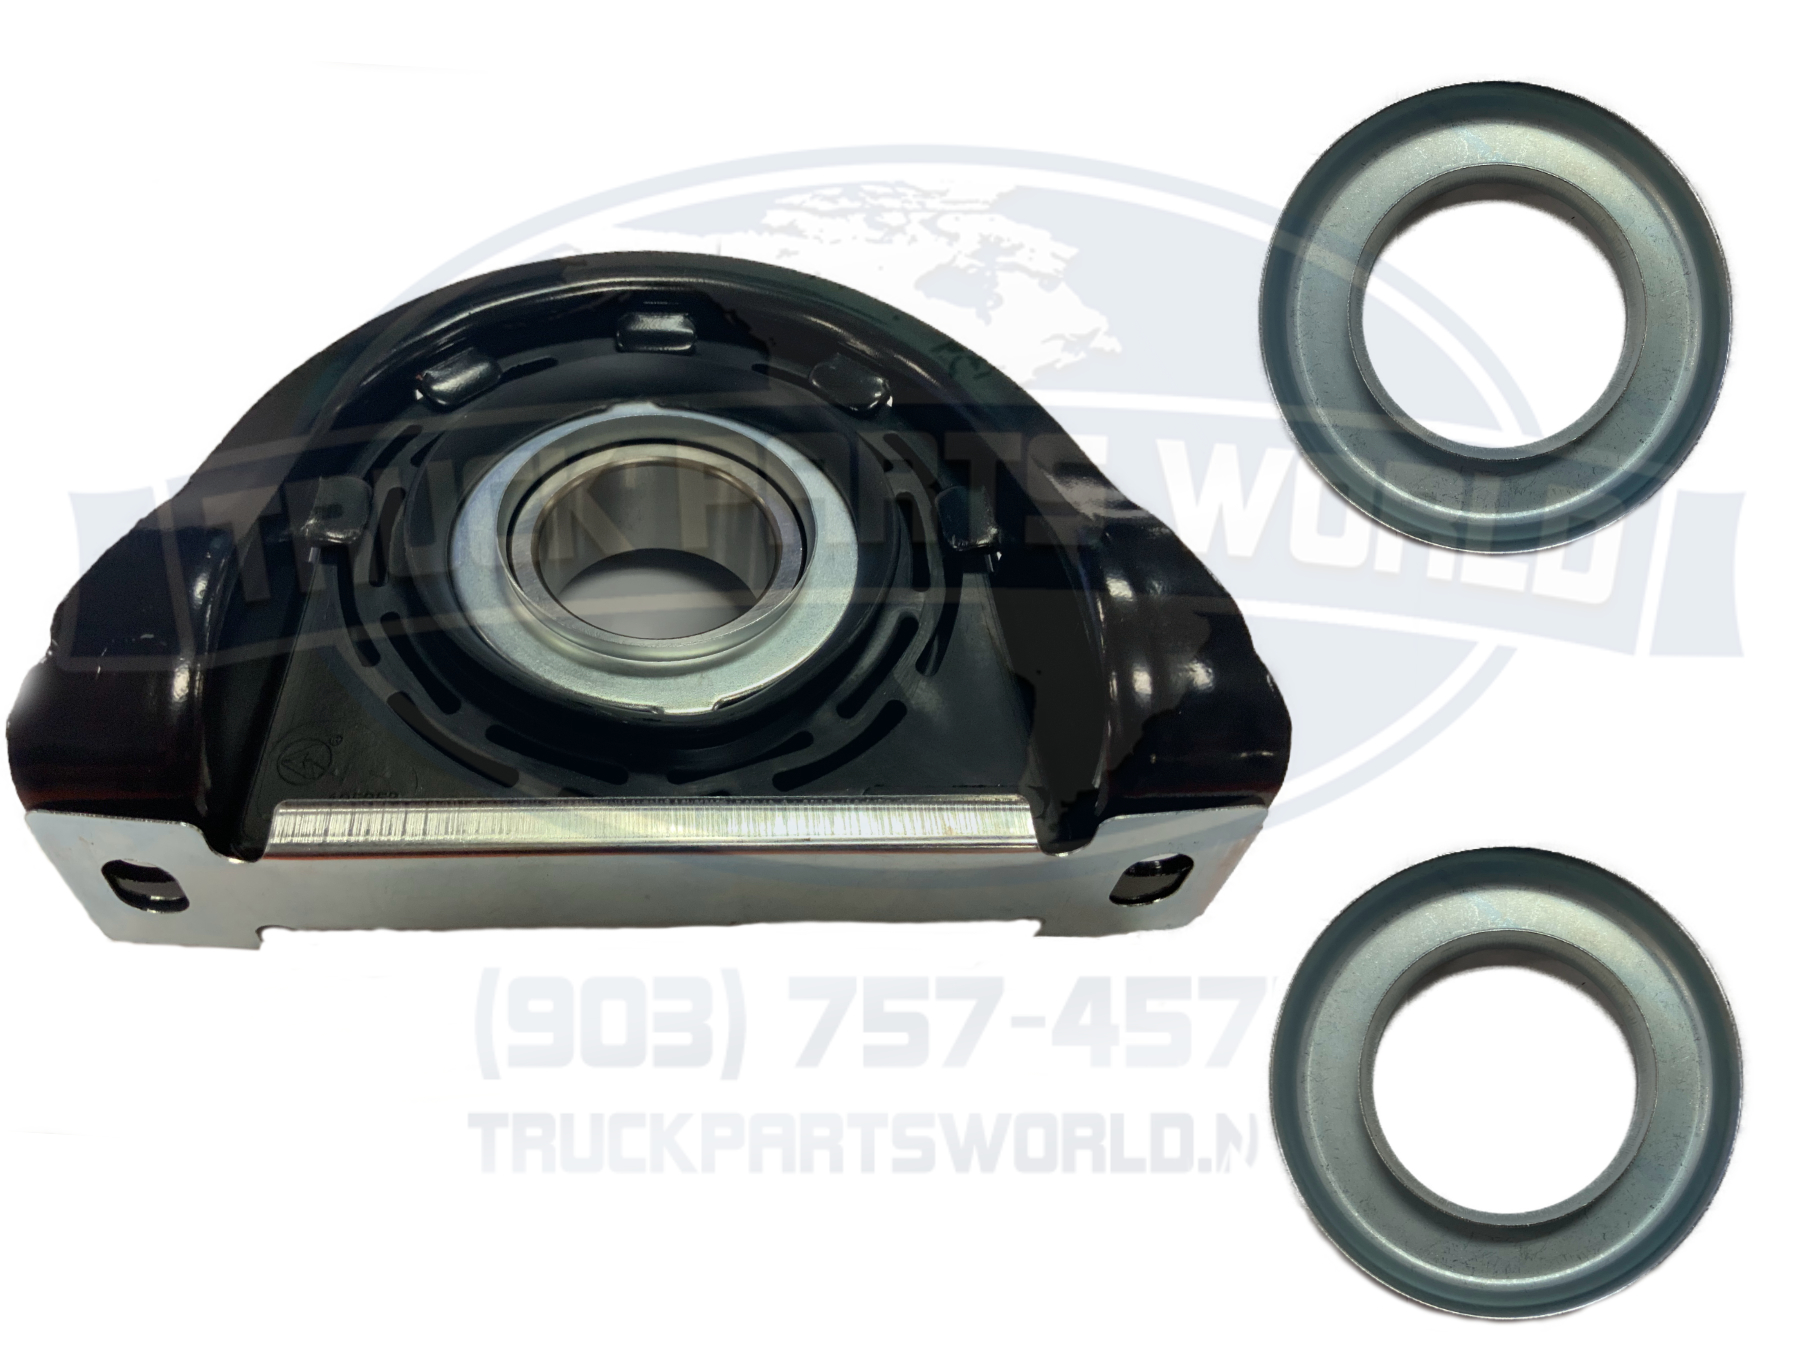 New Heavy Duty HD Drive Shaft Center Support Bearing Part DS66601 210661-1x